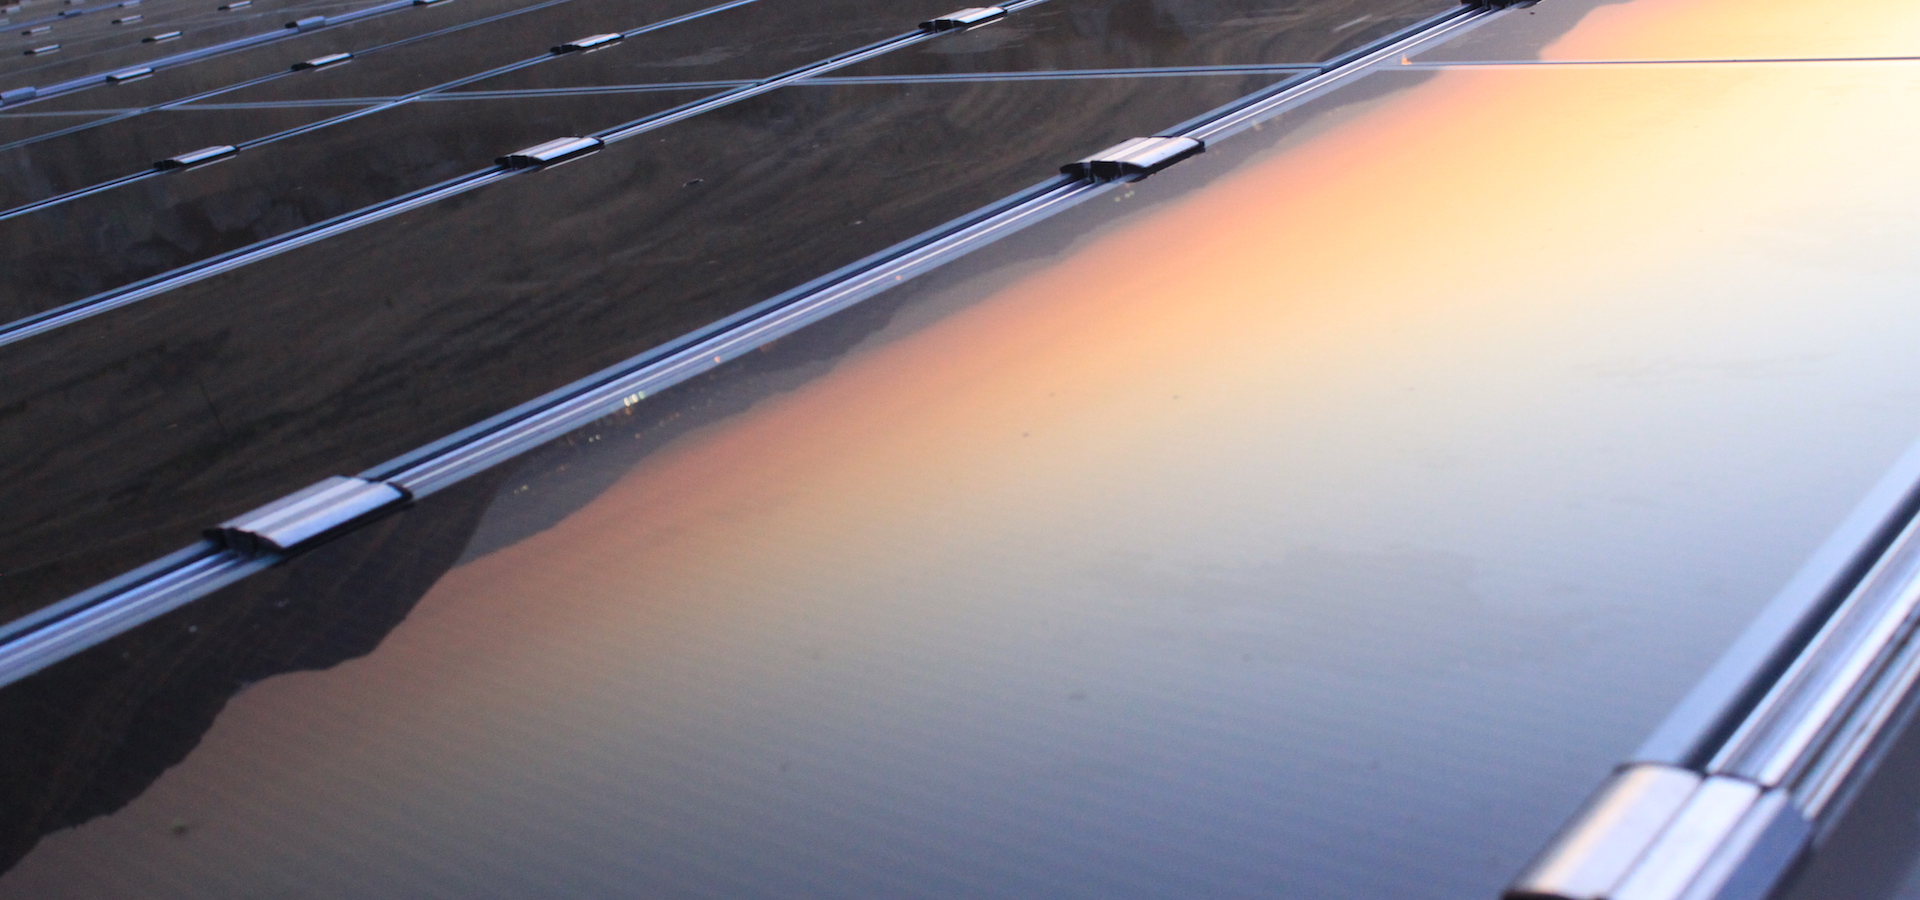 Solar panels reflecting mountains and sunset